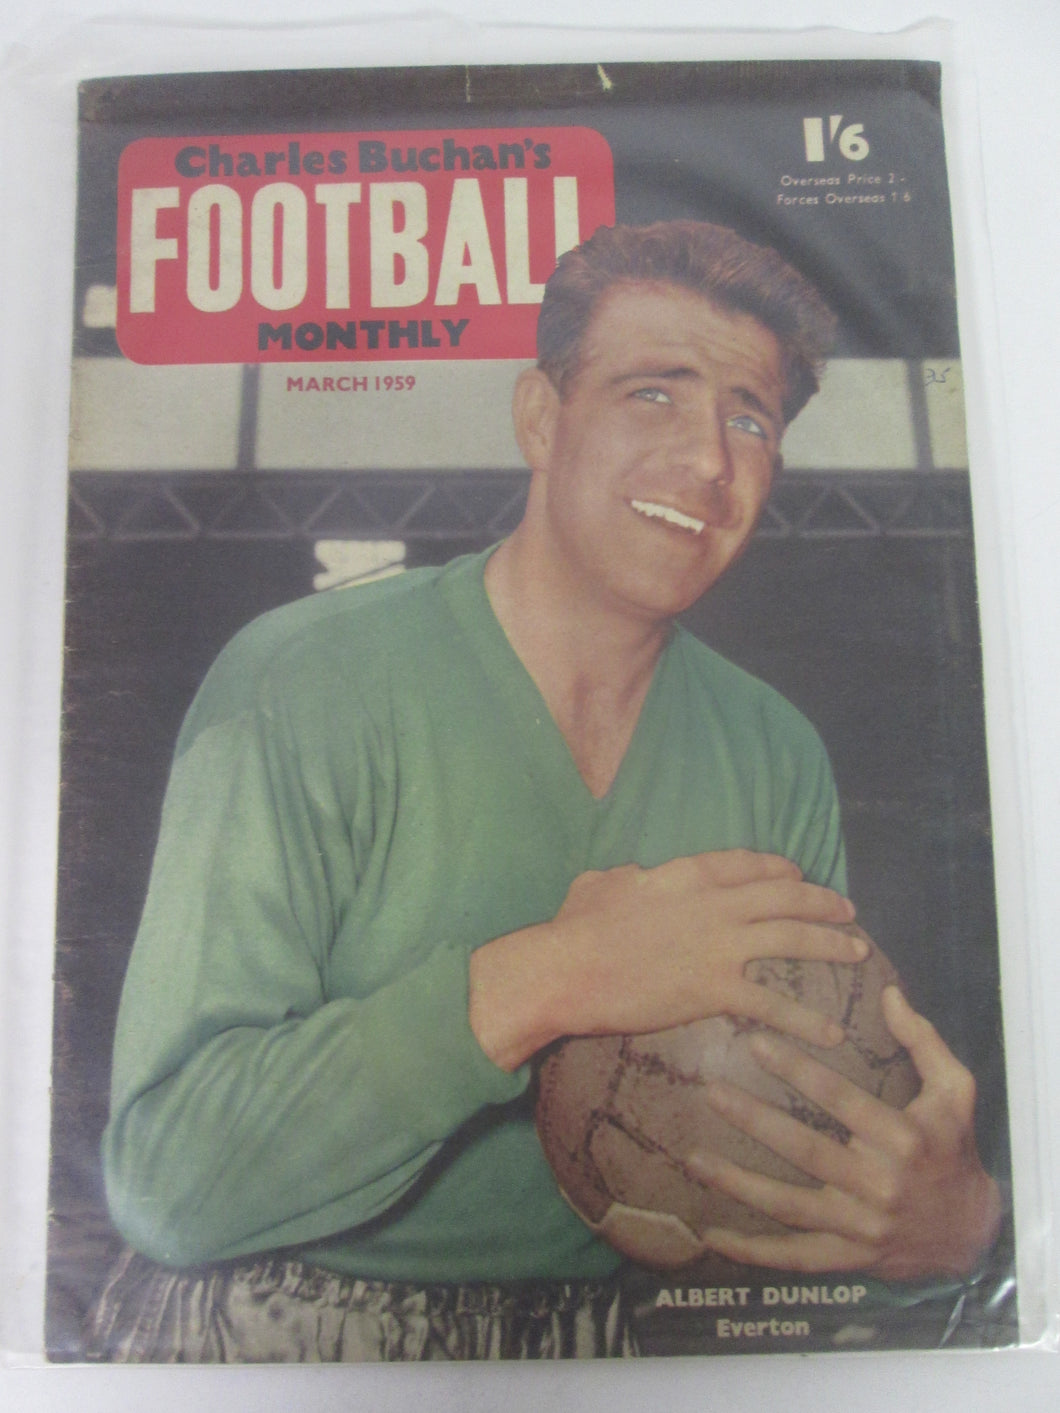 Charles Buchan's Football Monthly Magazine Albert Dunlop Cover March 1959